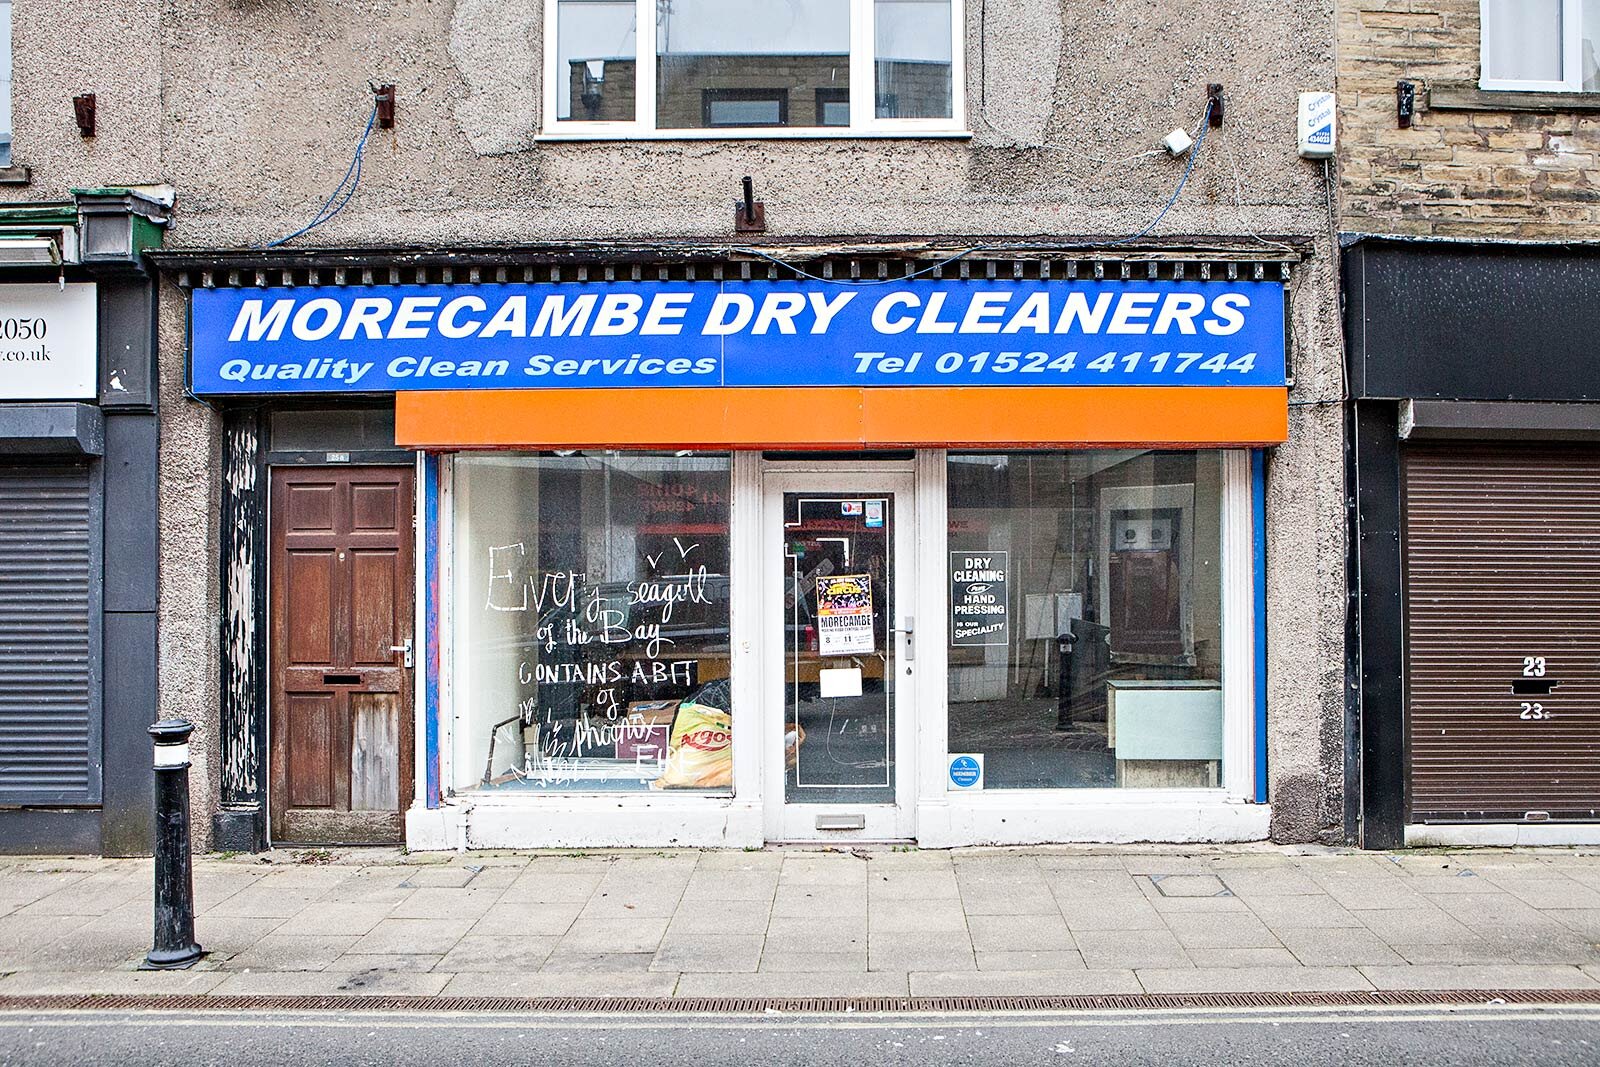 Morecambe Dry Cleaners, Yorkshire Street West, Morecambe, 2018 (34/50)